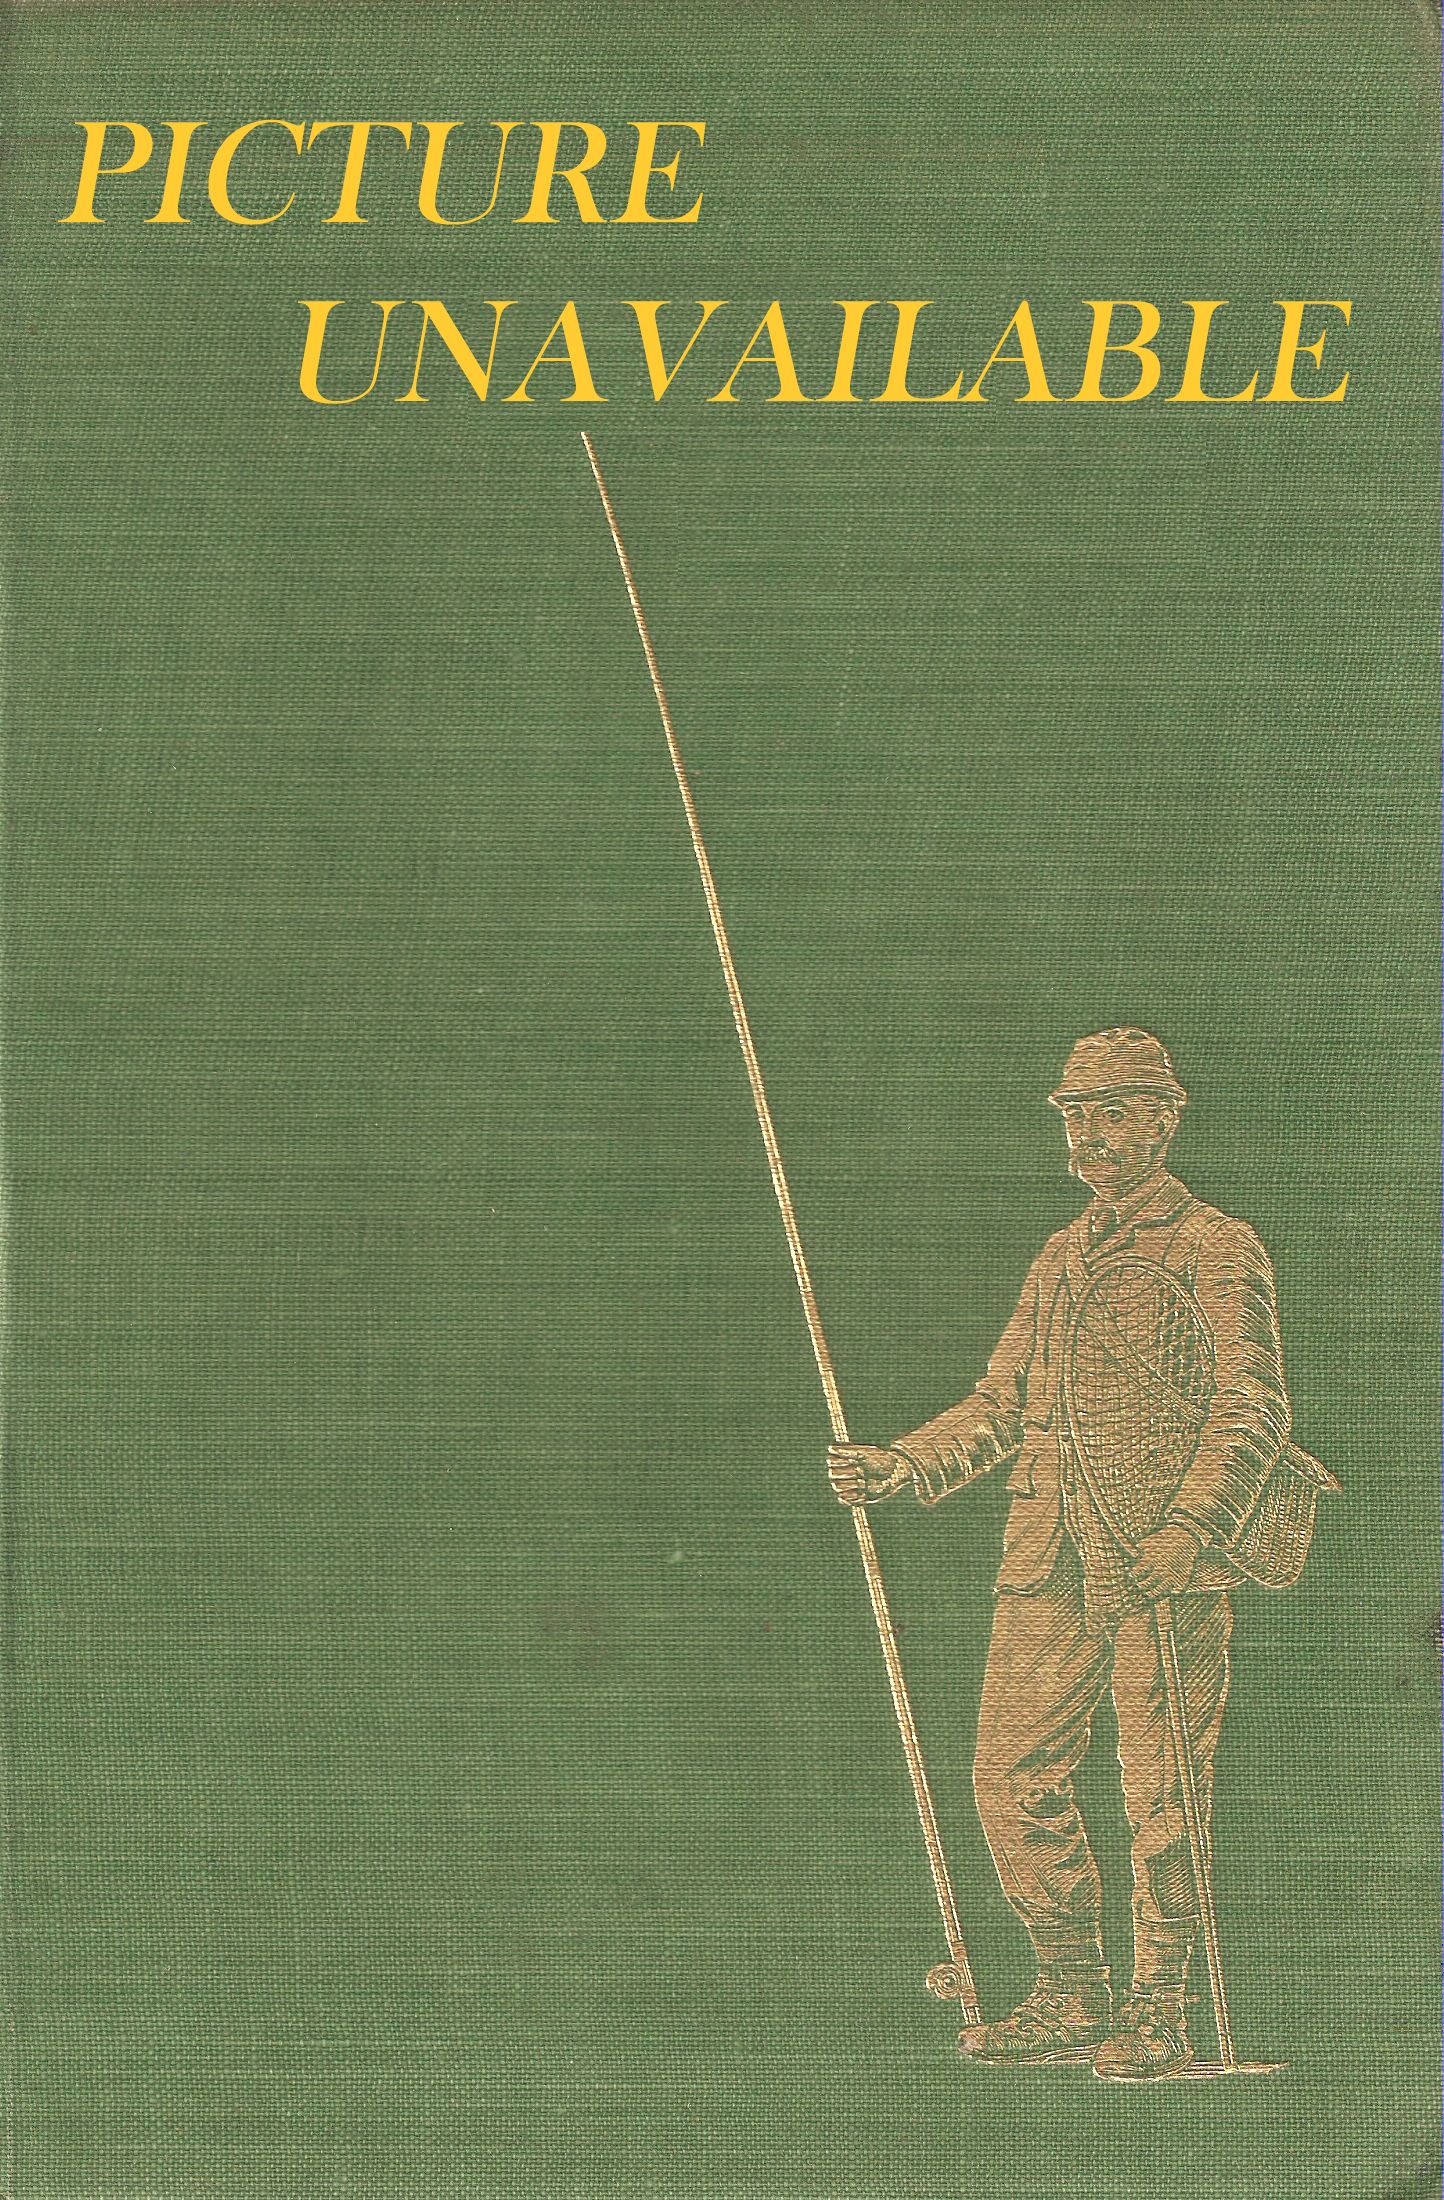 LETTERS TO YOUNG SPORTSMEN ON HUNTING, ANGLING AND SHOOTING. By  Lieutenant-Colonel J. Mackillop, Horace G. Hutchinson and Major Kenneth  Dawson. Illustrated by Lionel Edwards.